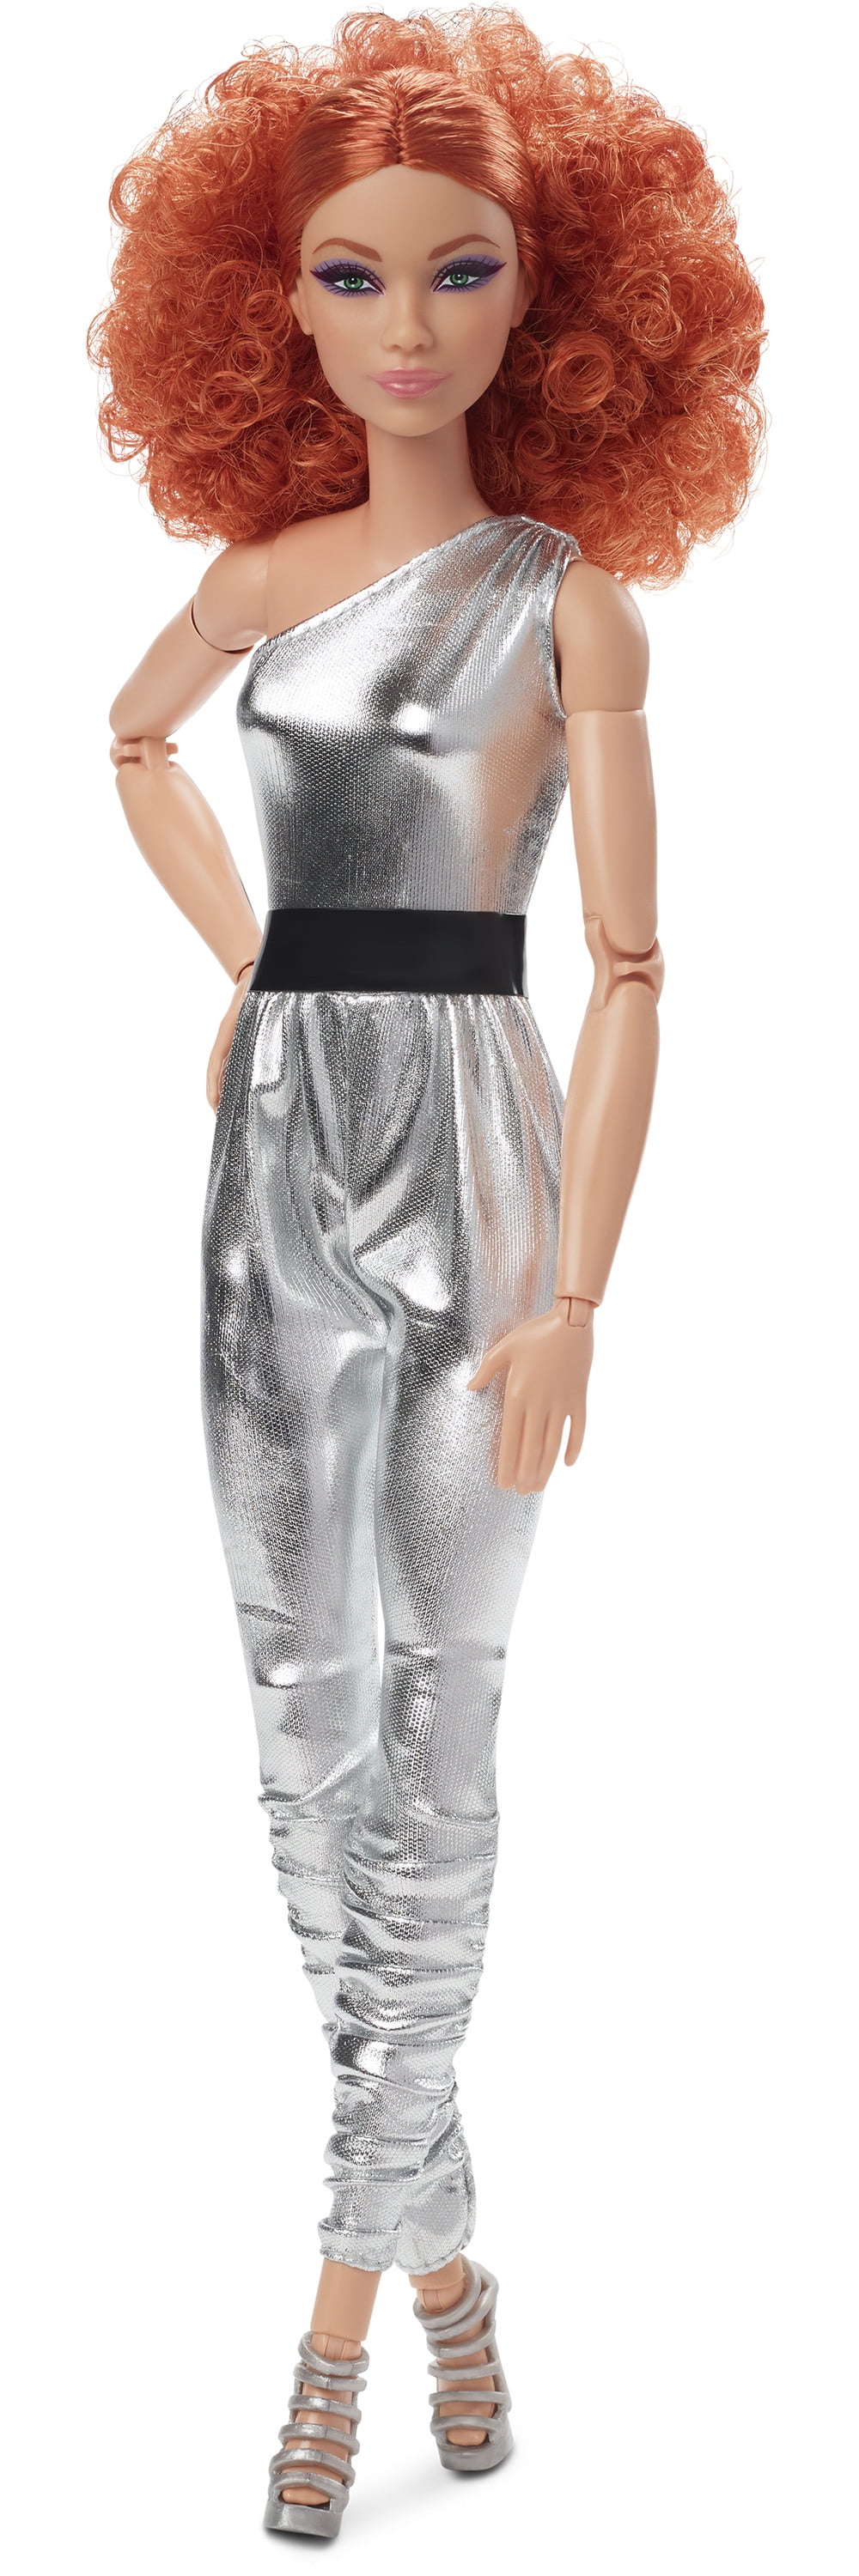 Barbie Looks Collectible Fashion Doll, Posable with Curly Red Hair &  Metallic Jumpsuit 